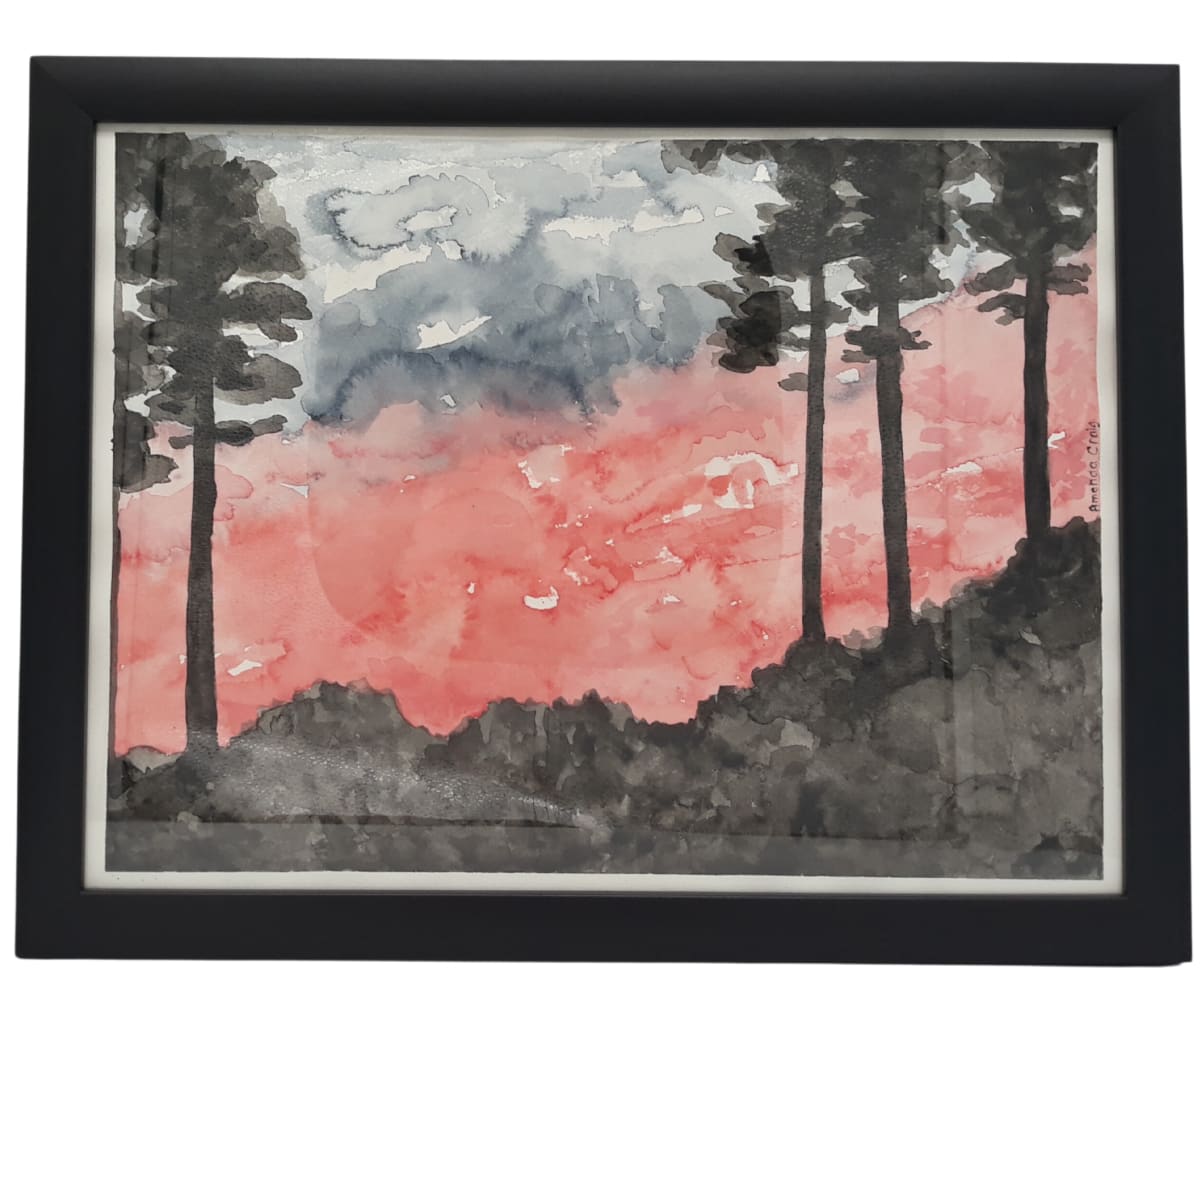 Lost Pines Sunrise by Amanda Craig  Image: Original watercolor on Arches cold pressed watercolor paper. Black wood frame with glass.  Sunrise in 2022 from the Lost Pines in Tahitian Village of Bastrop, Texas. Print of inspirational image on back.